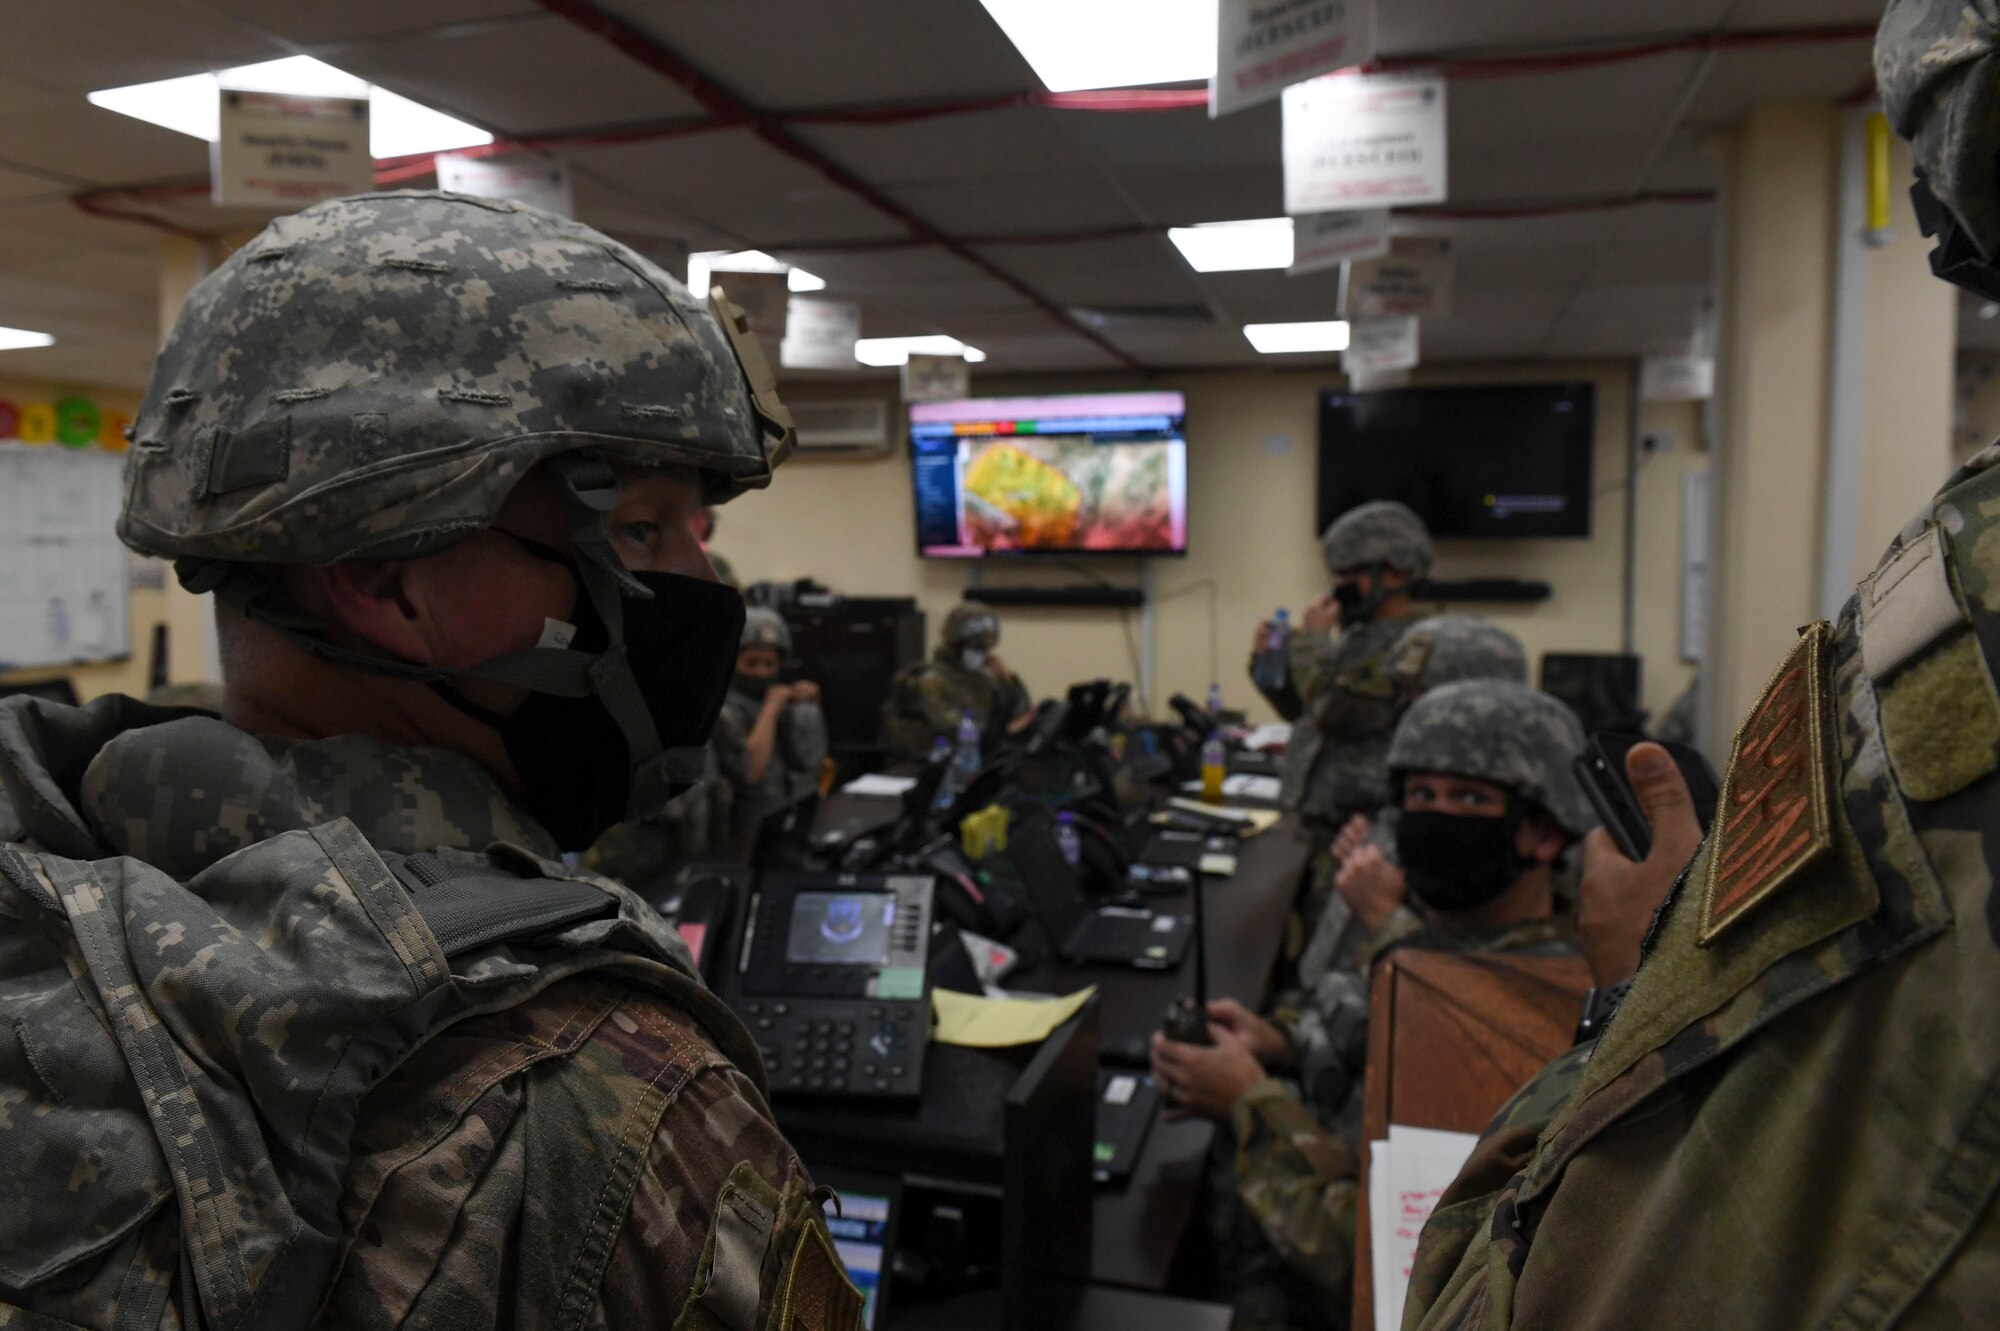 U.S. Air Force Airmen gather information in the emergency operations center during the Air and Missile Defense Exercise 21-1 at Ali Al Salem Air Base, Kuwait, Oct. 22, 2020.